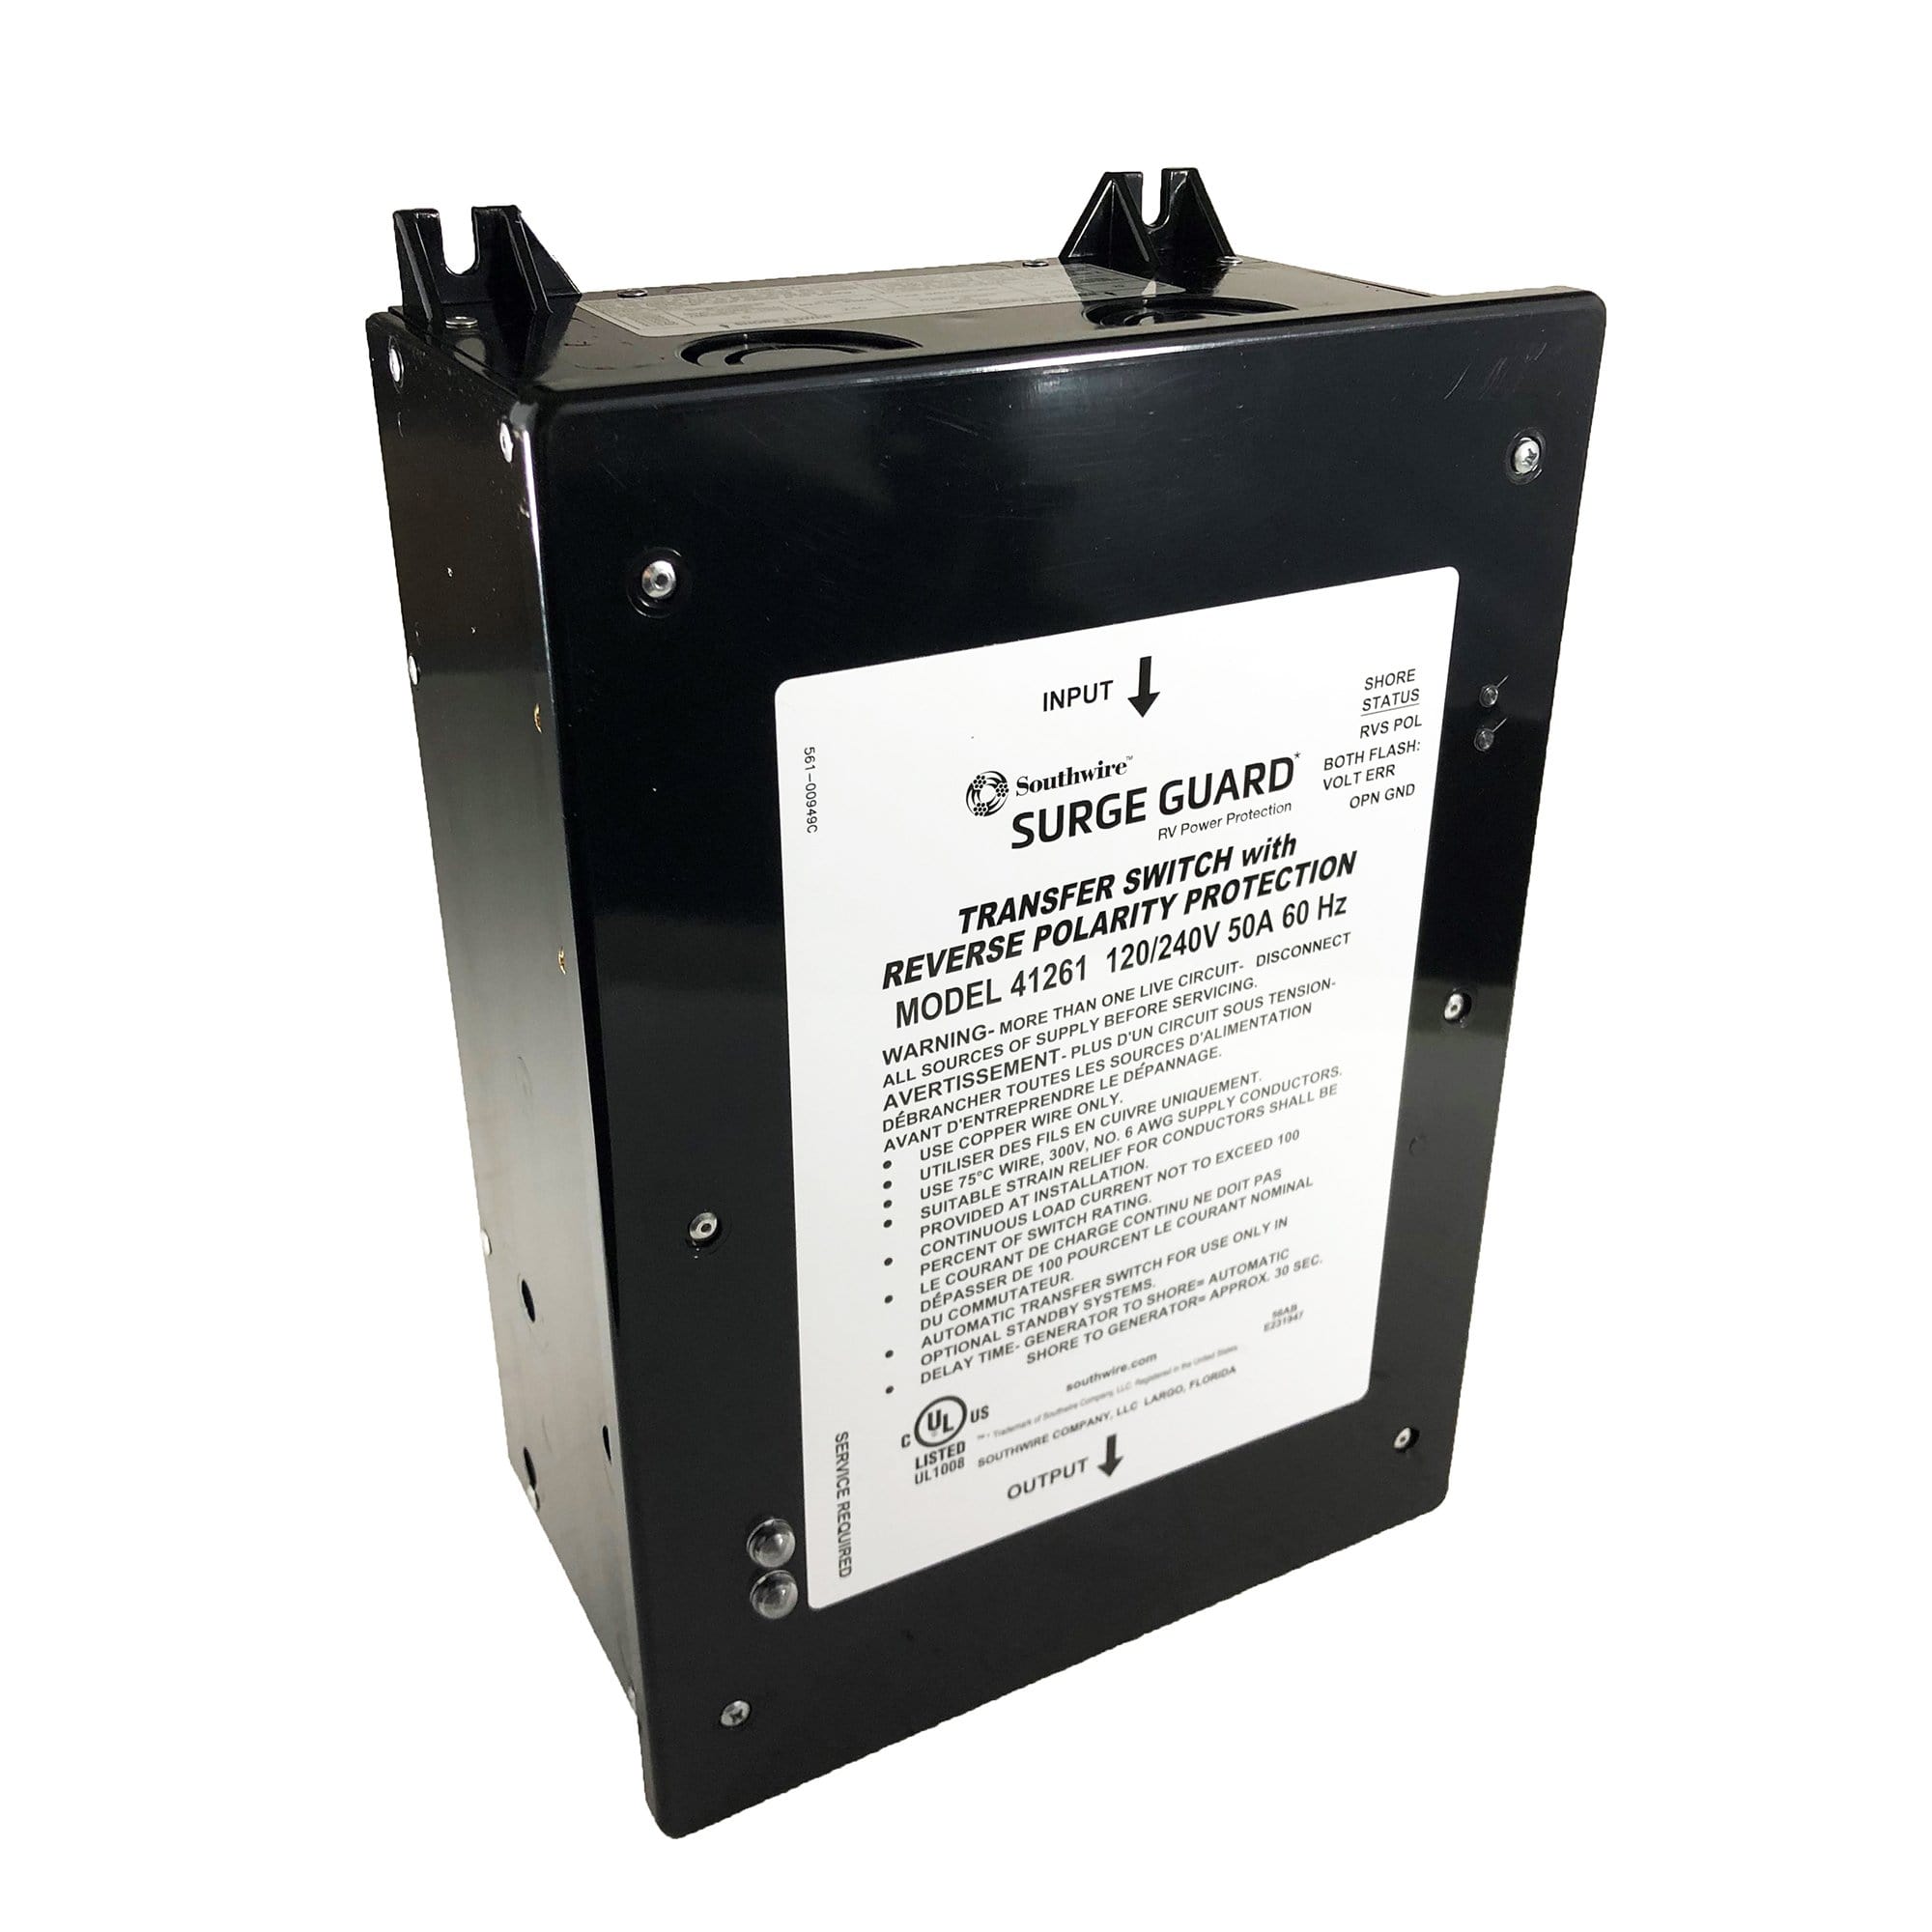 Southwire 41261-011 Entry Level 50A Surge Guard Reverse Polarity Trans